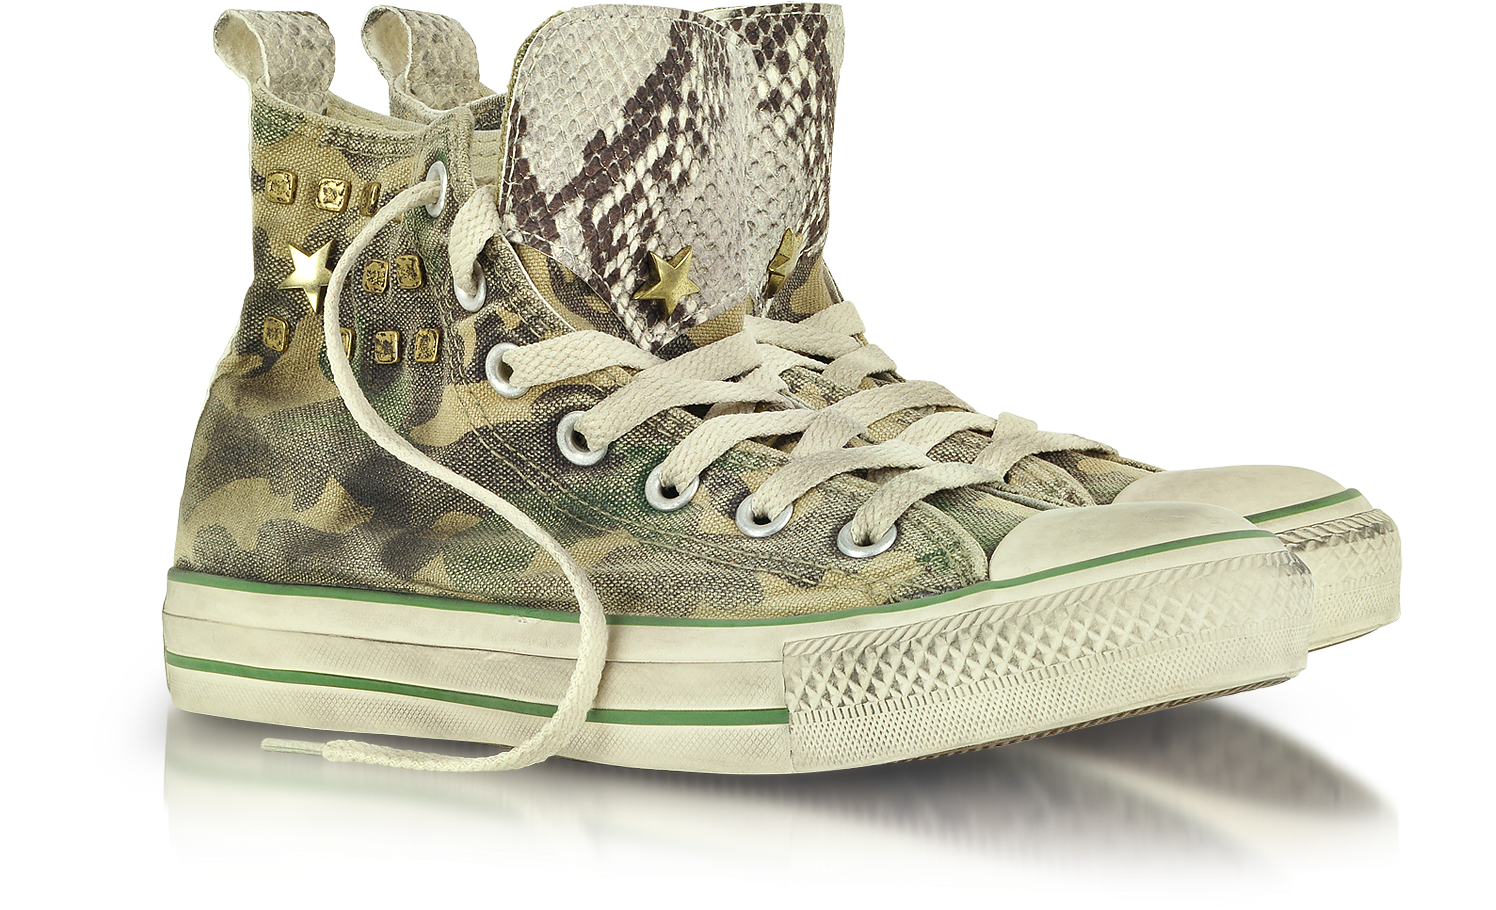 converse limited edition camouflage